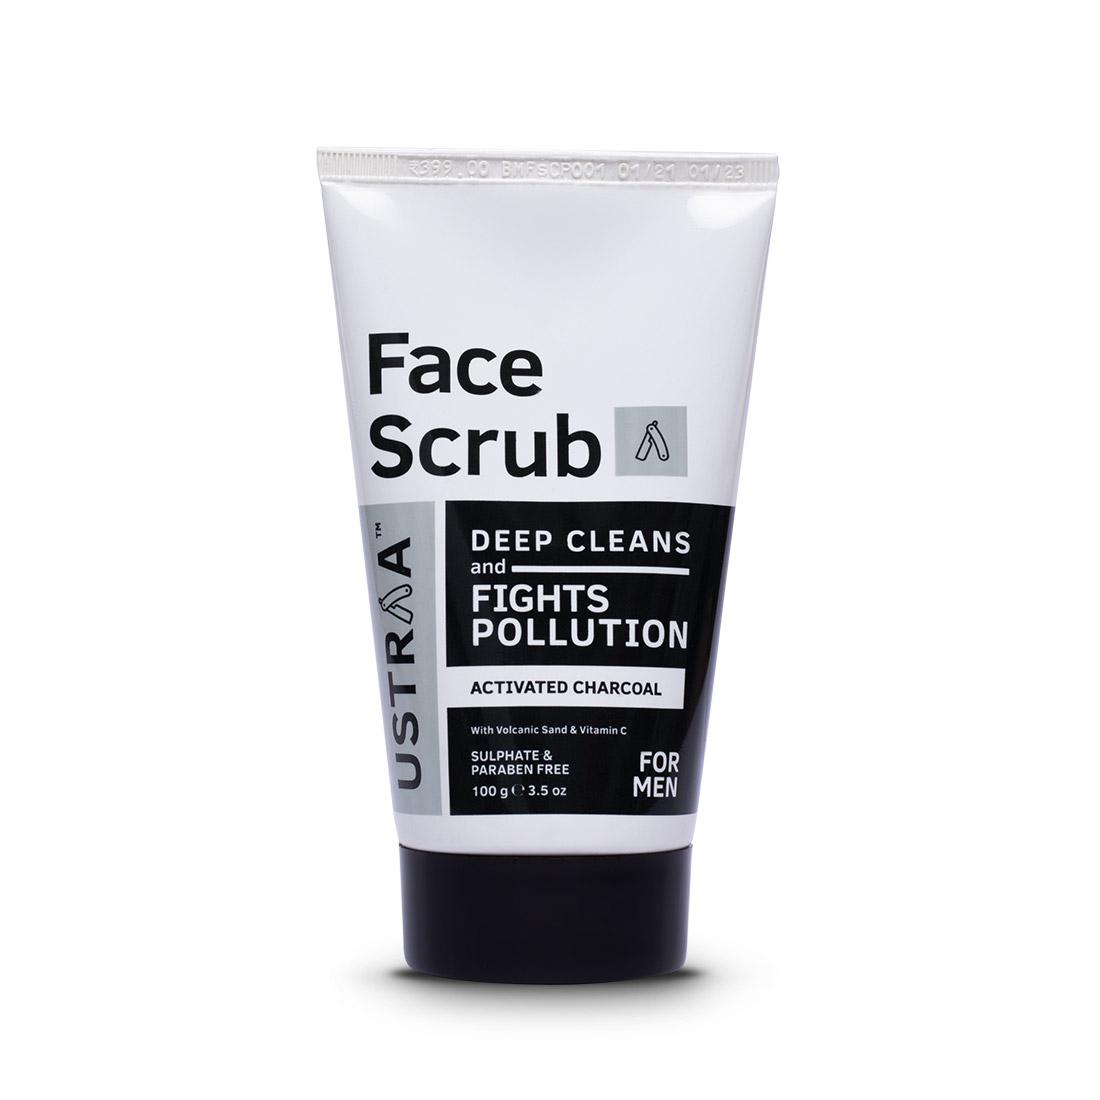 Ustraa Activated Charcoal Face Scrub 100 g - A Face Scrub for men with Volcanic Sand and Walnut Granules to free your skin of Toxins and Pollution